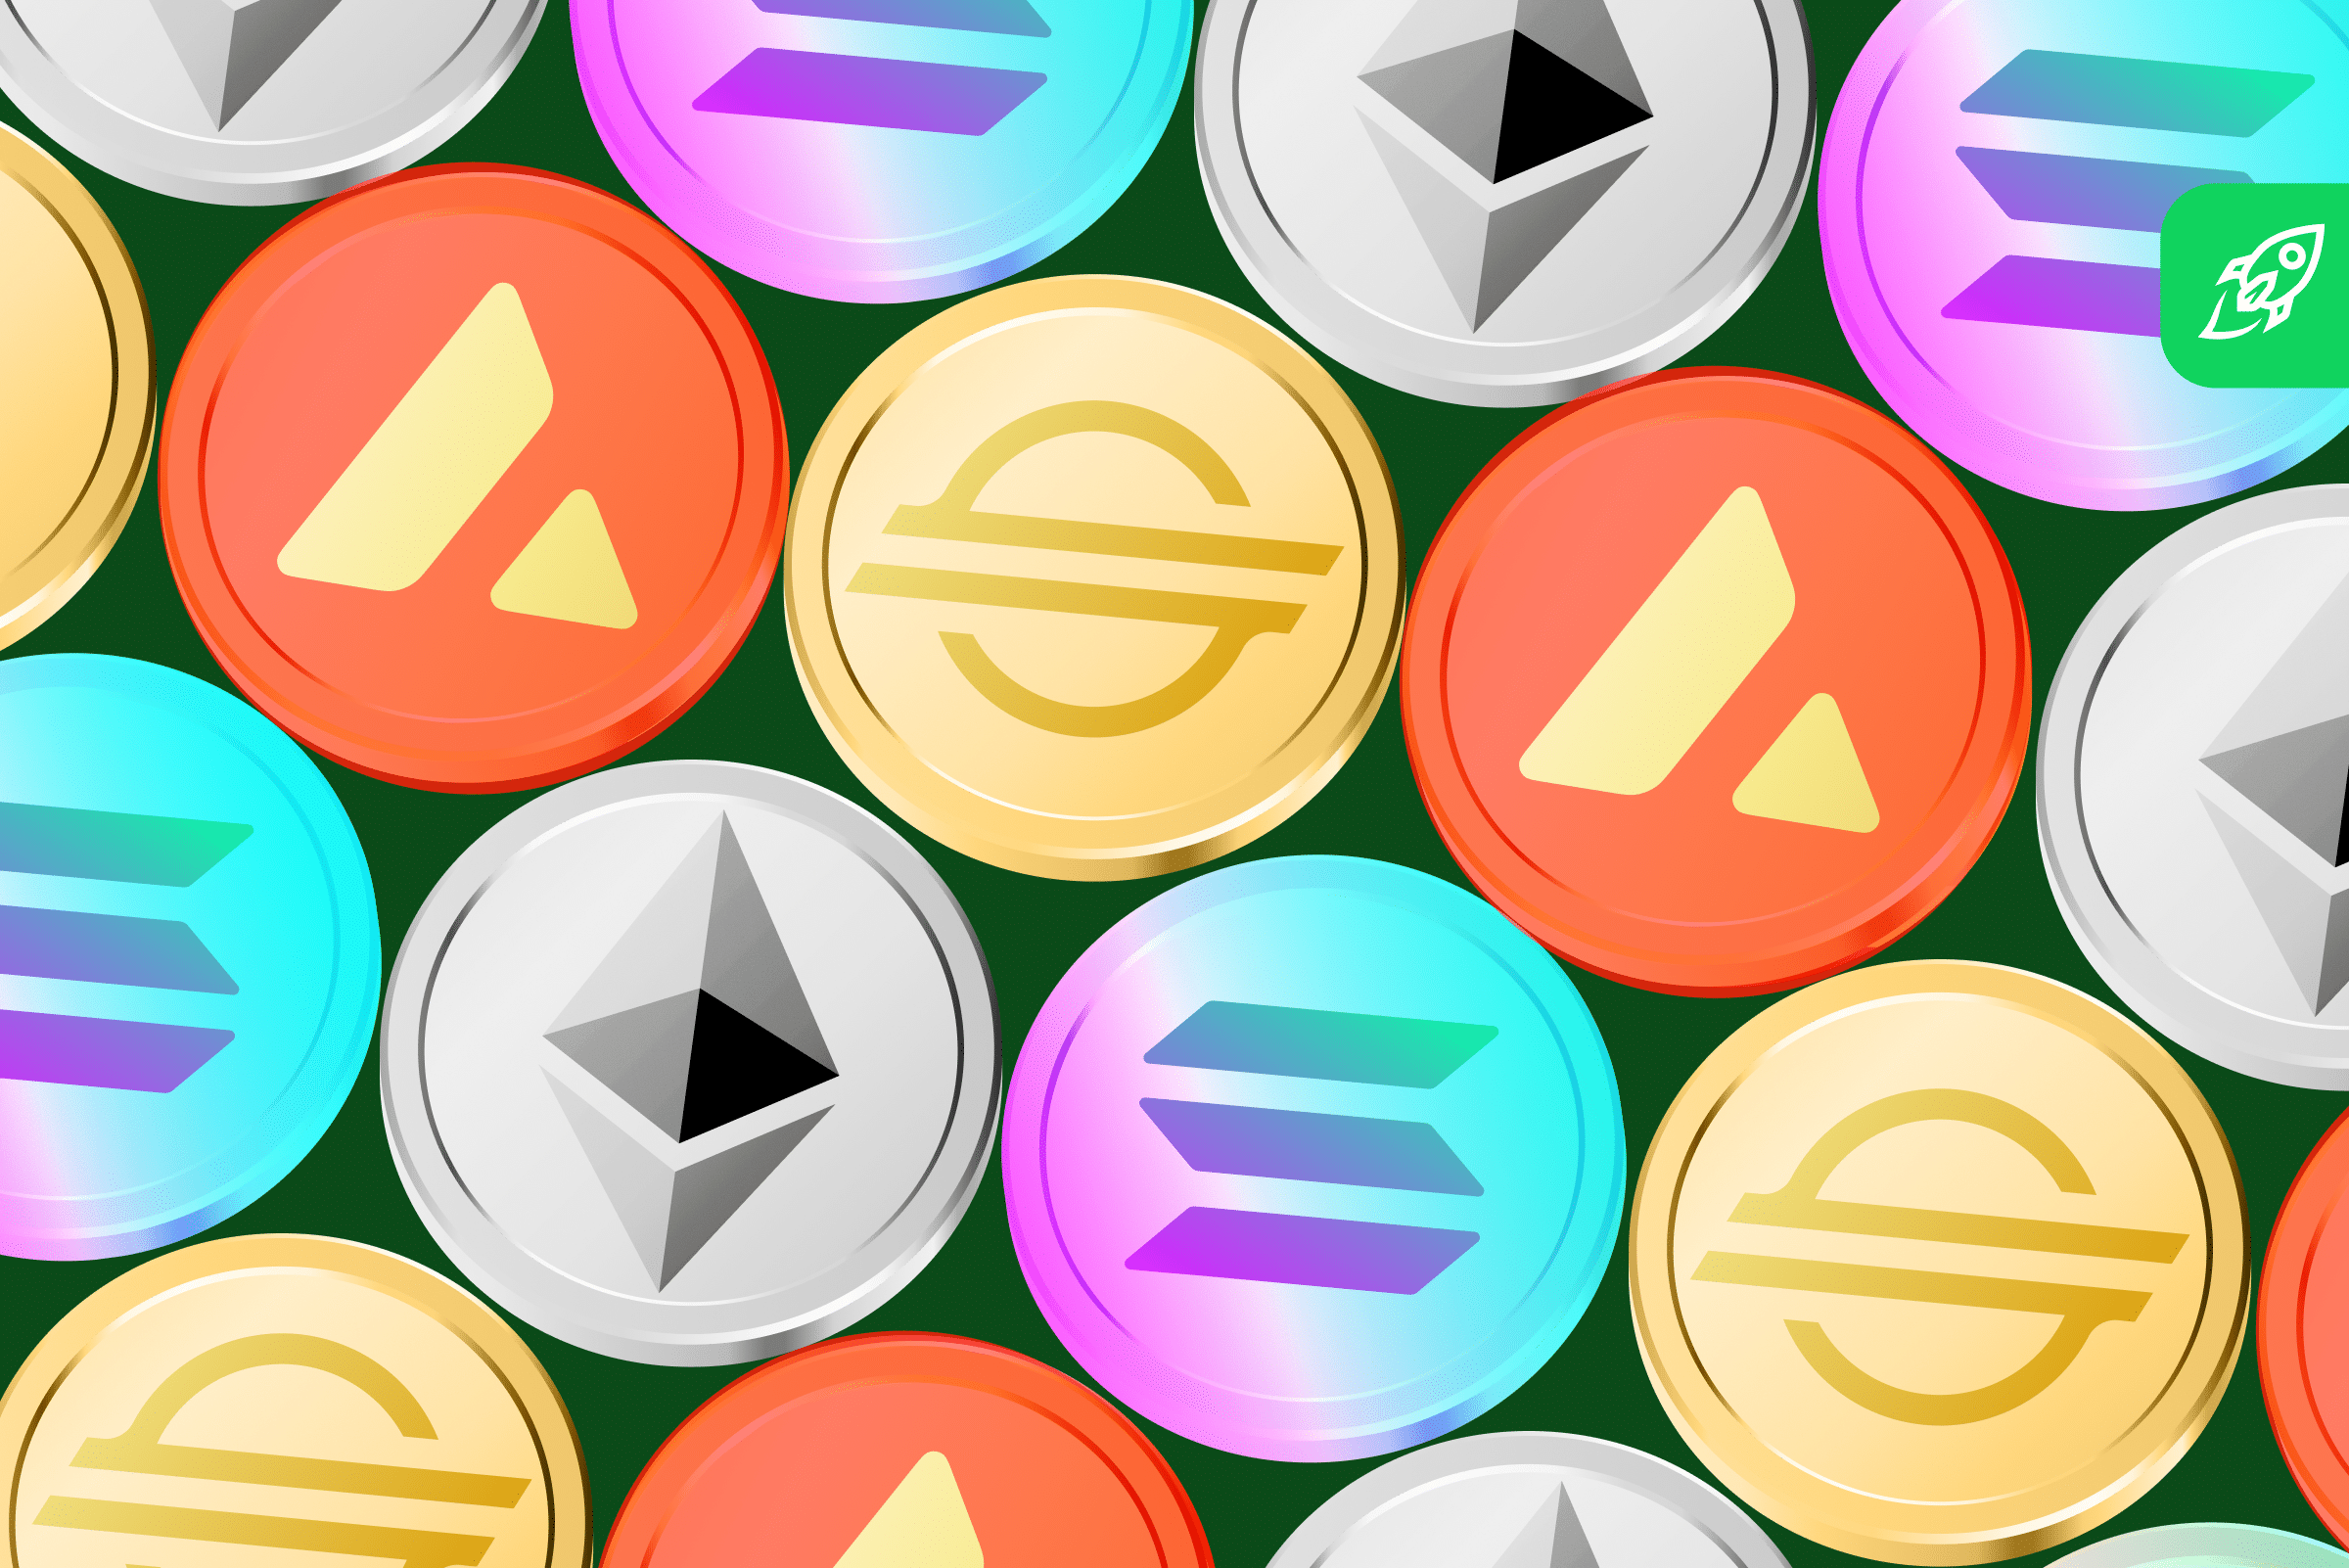 10 best altcoins in 